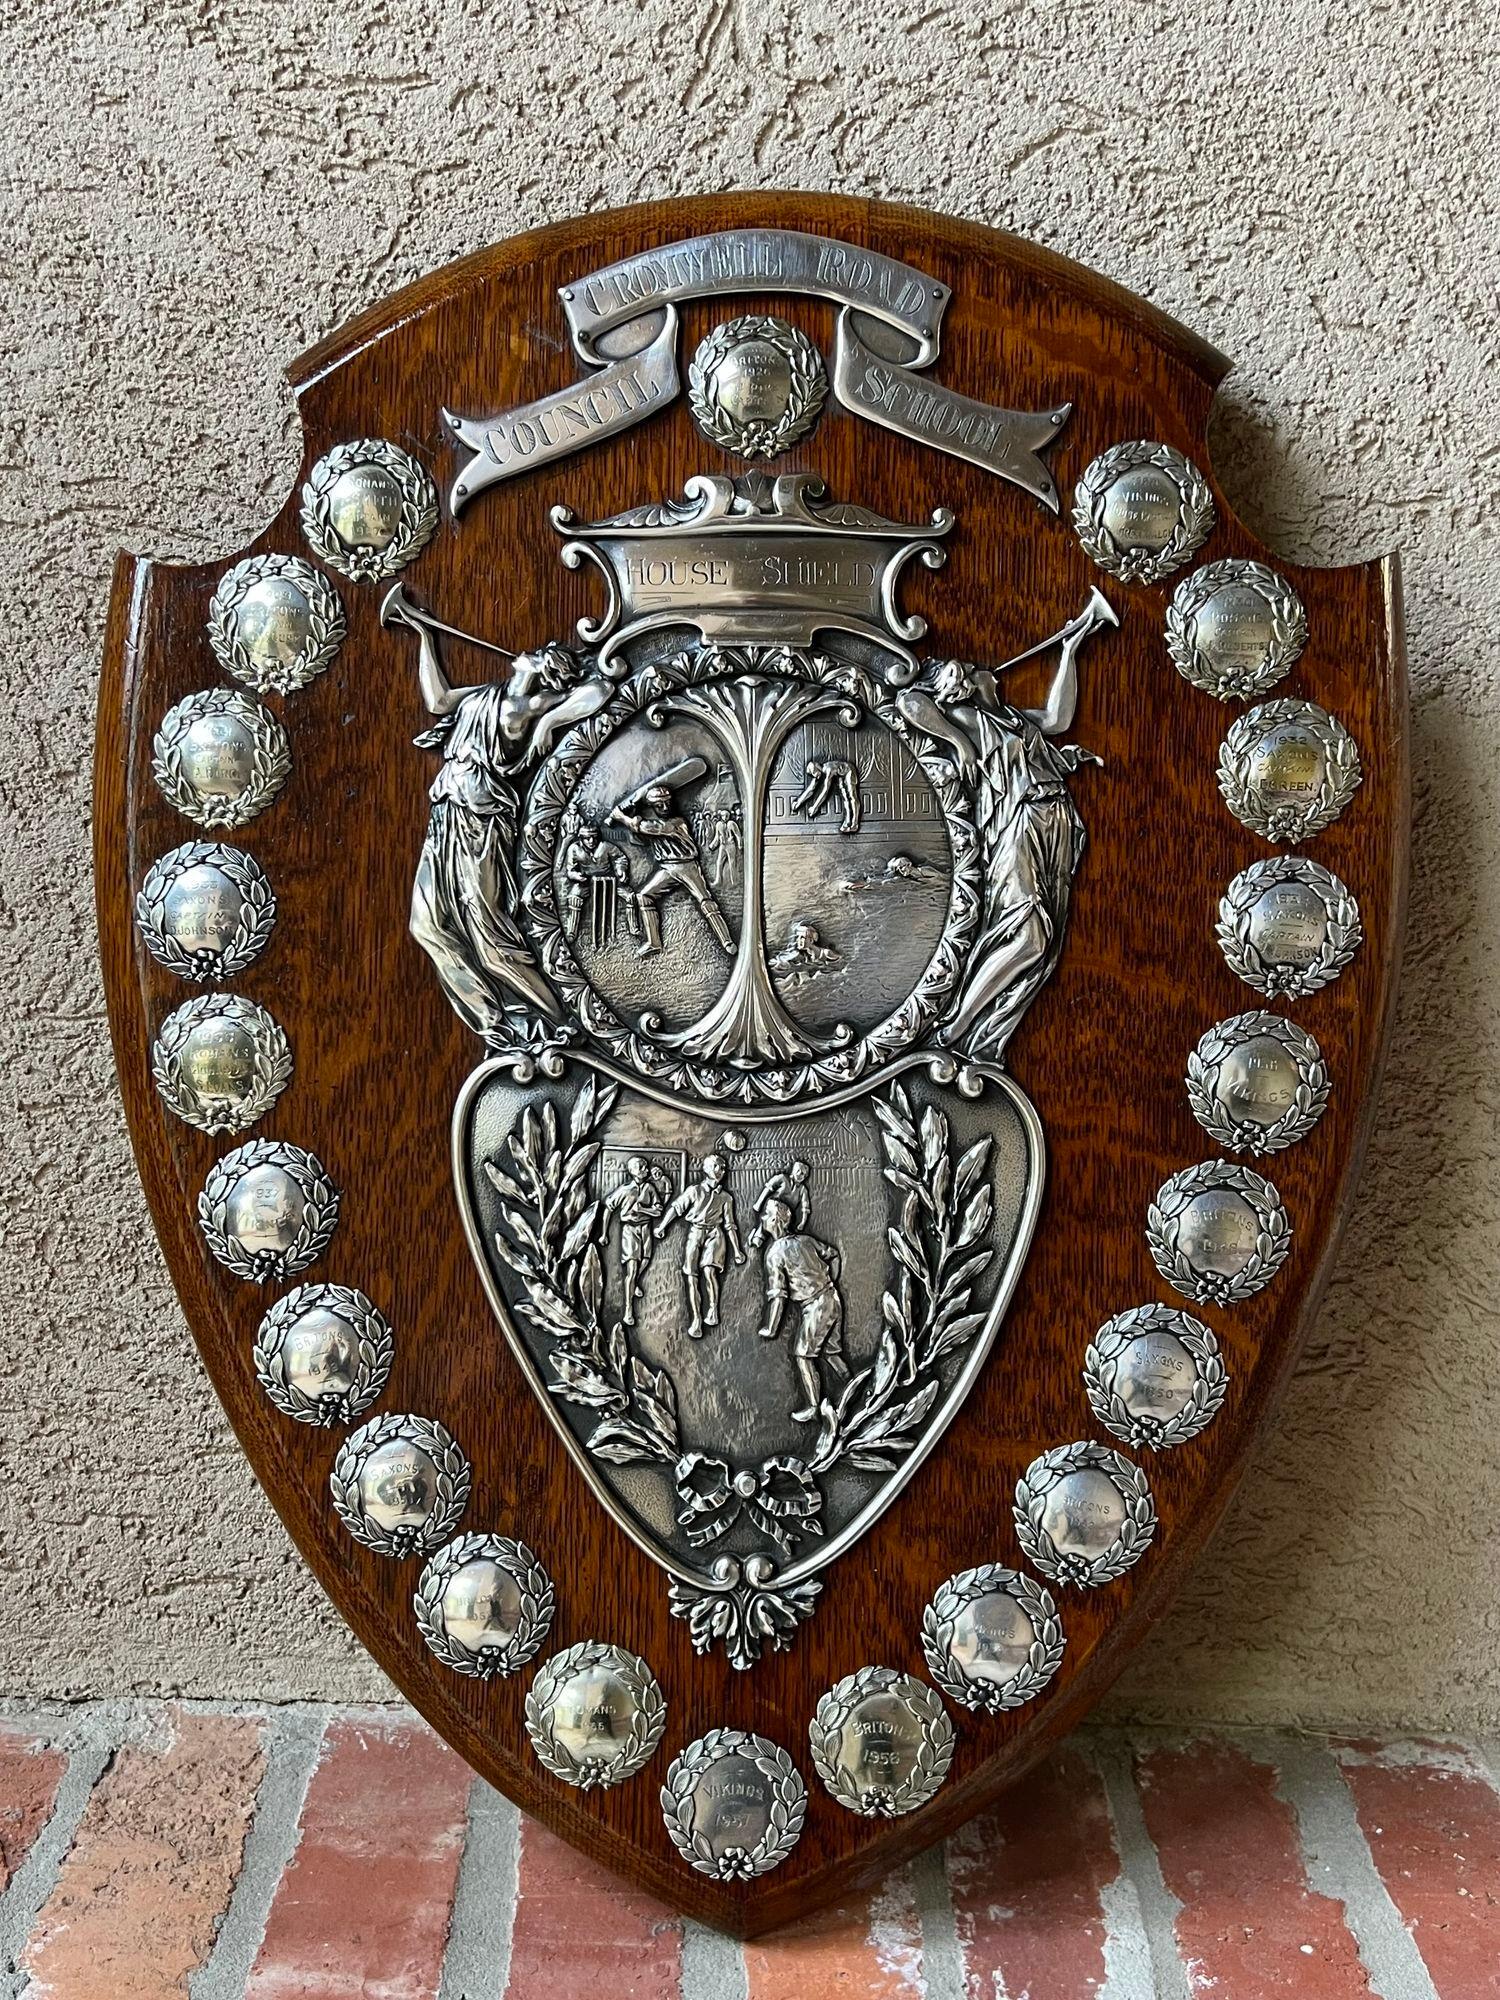 Antique English Trophy Baseball Soccer Swimming Award Plaque Repousse c1926 For Sale 4